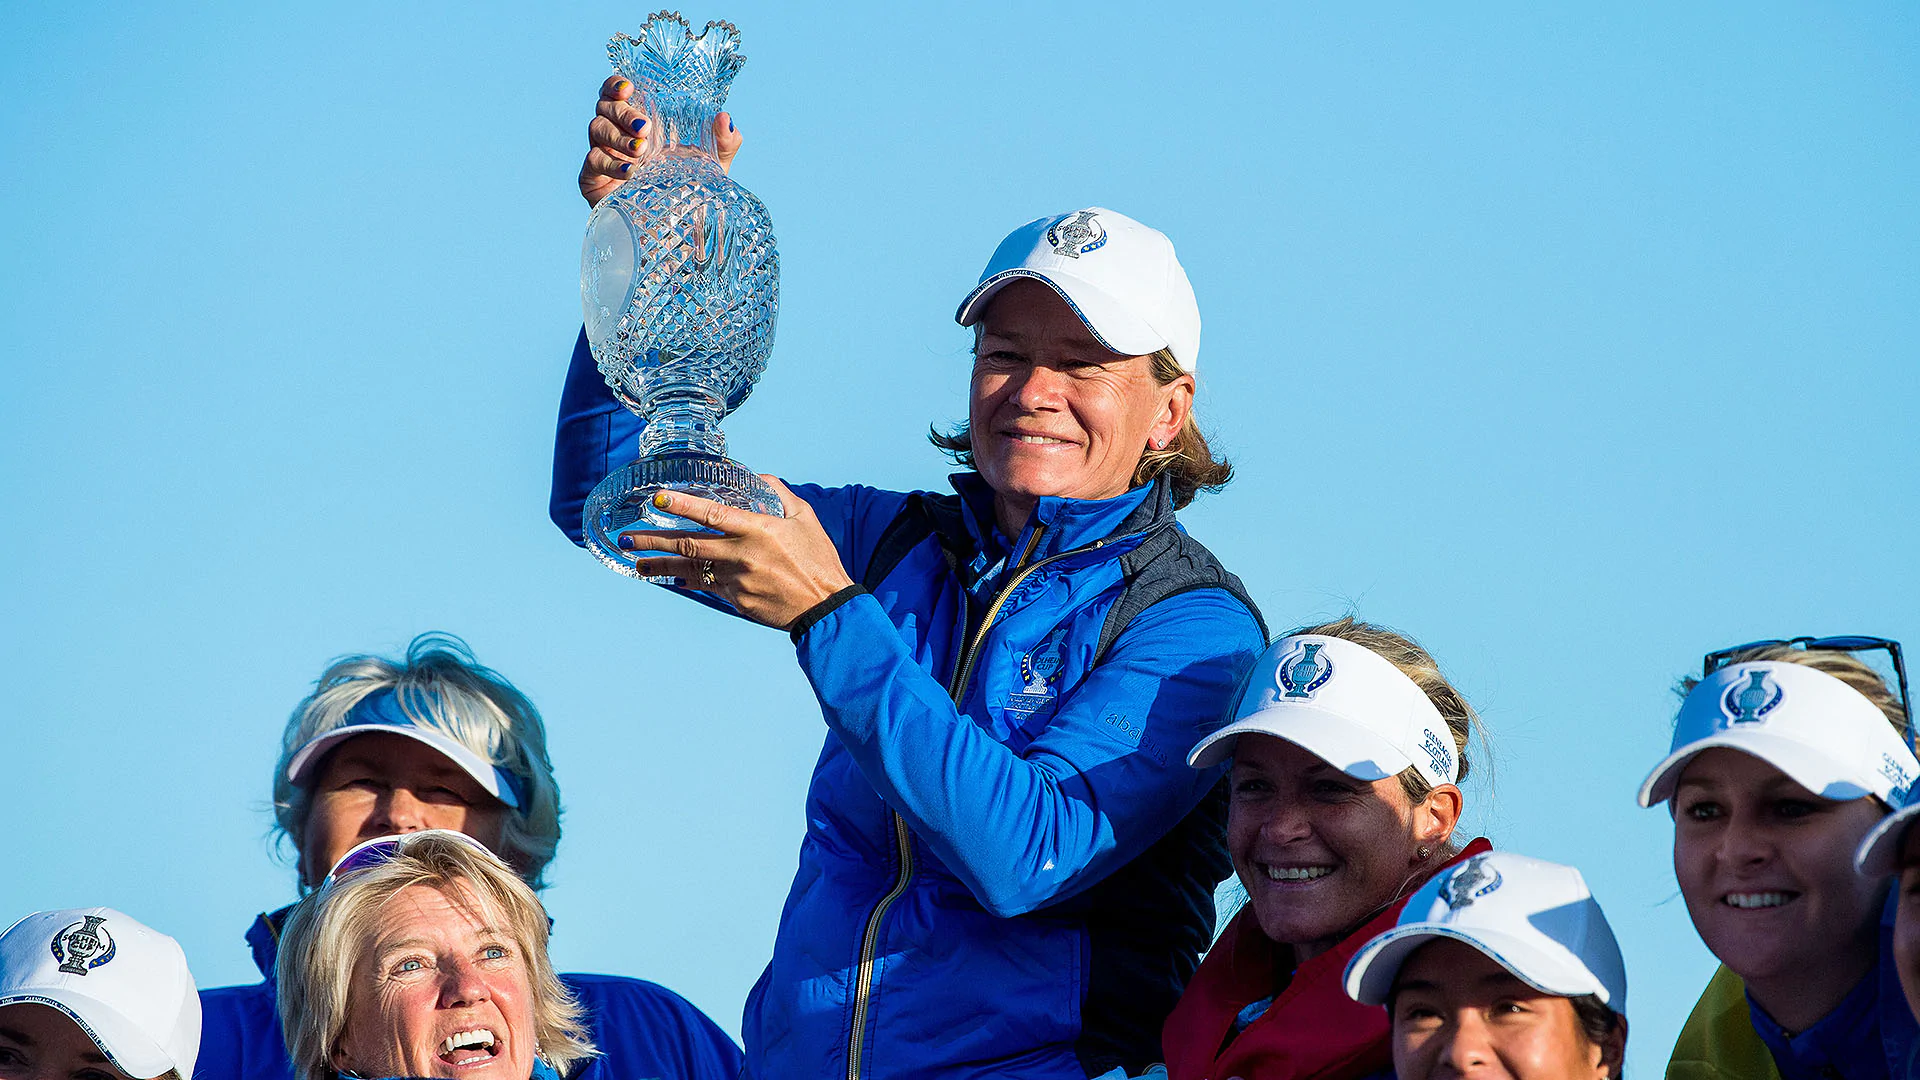 Spain, in 2023, to host Solheim Cup for first time